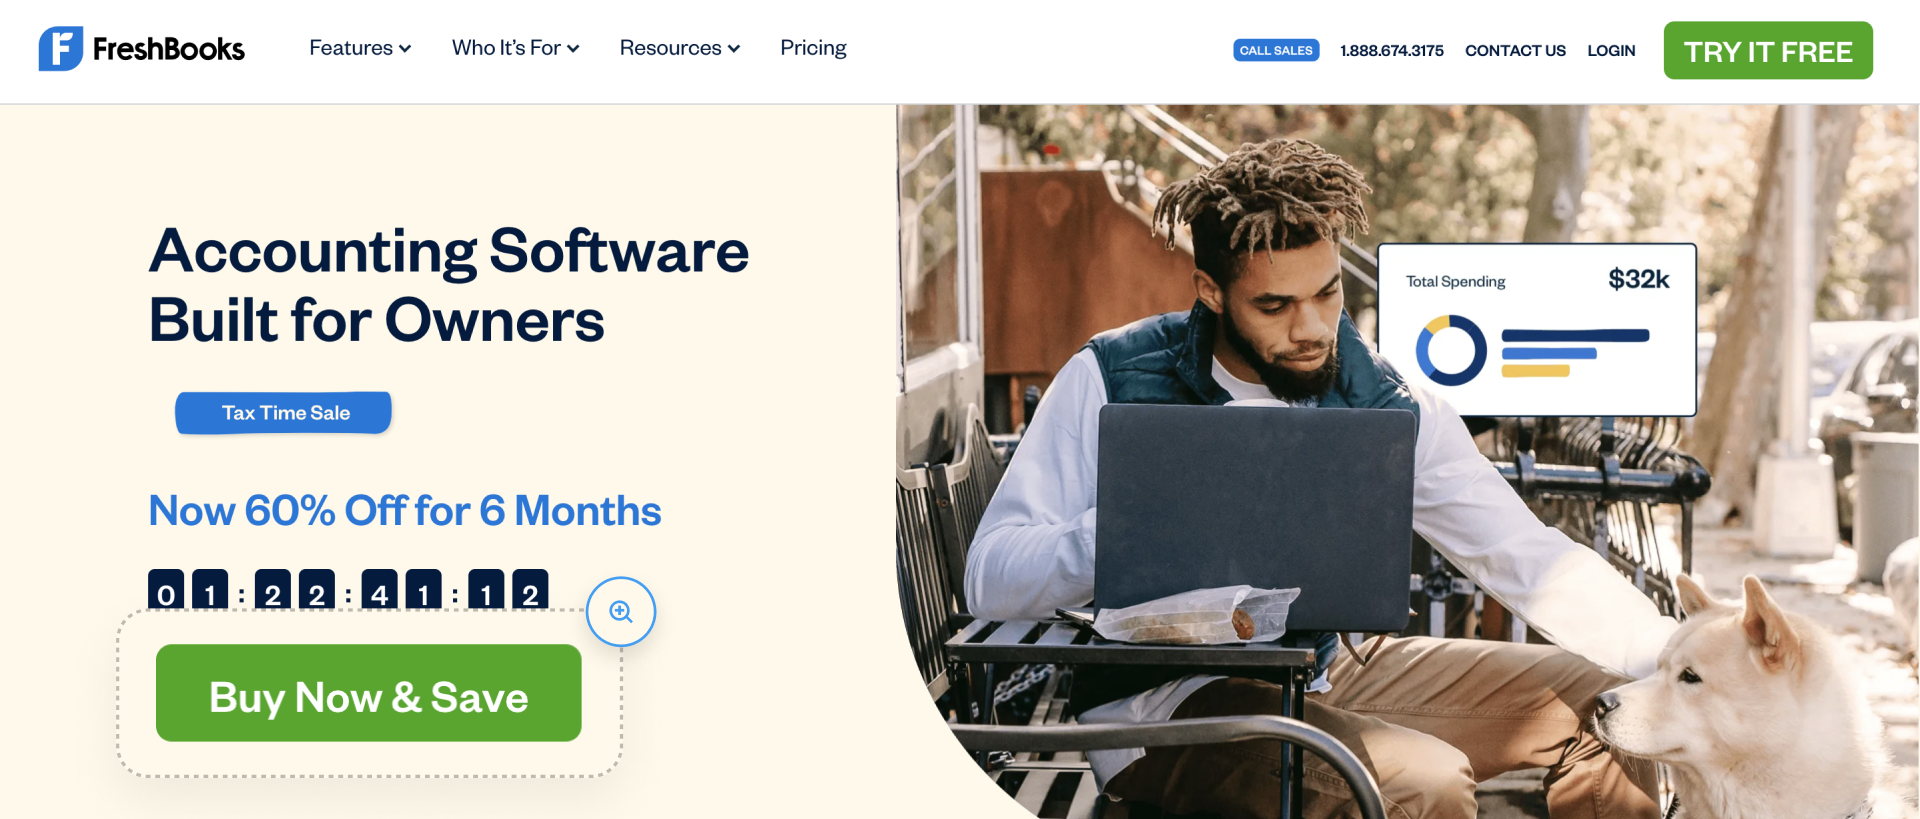 FreshBooks landing page screenshot with green Buy Now & Save call-to-action button